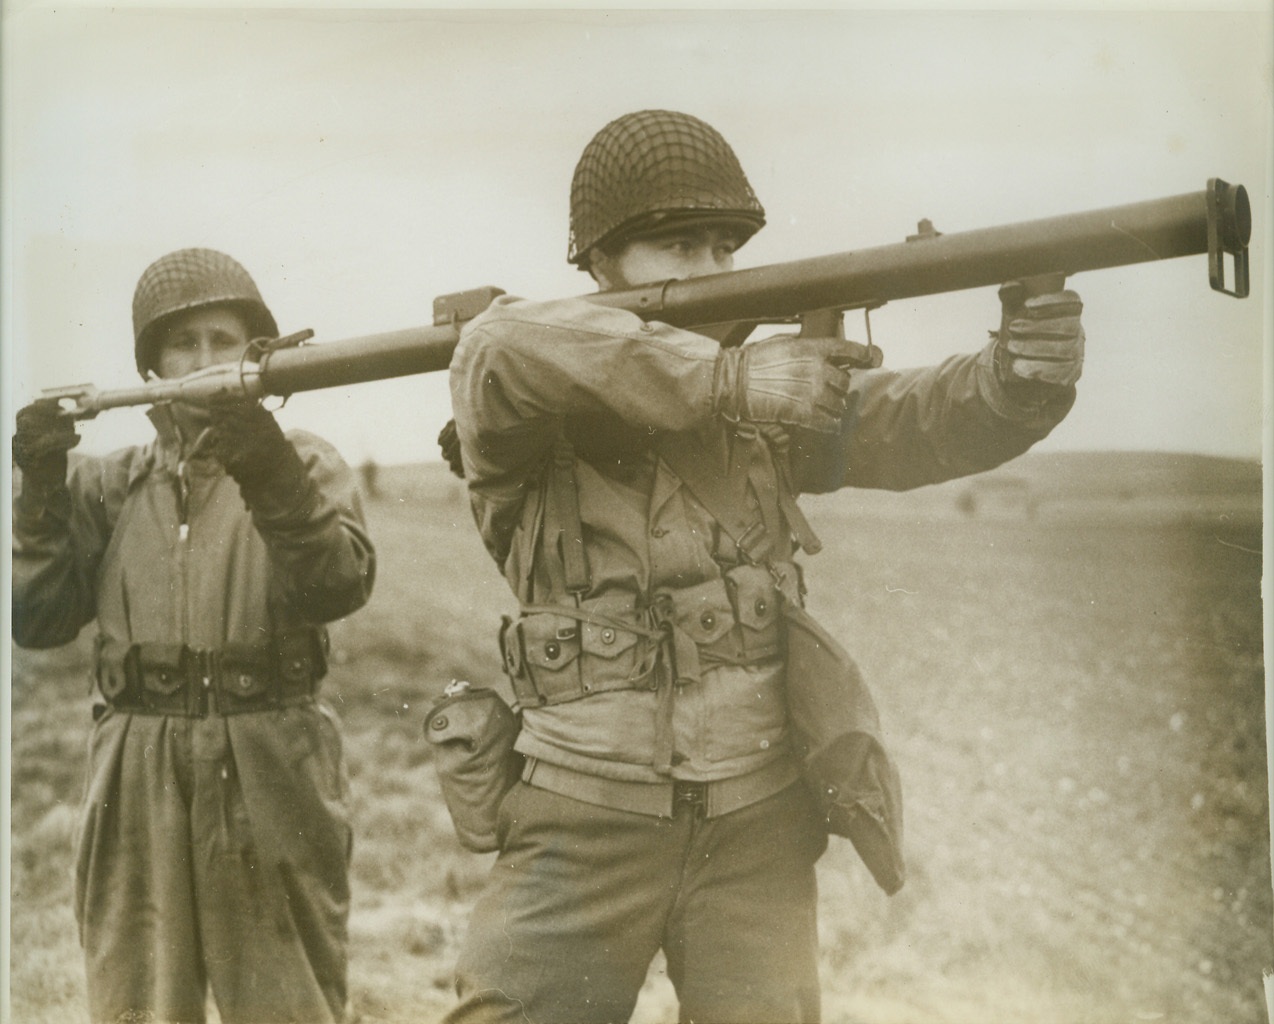 "Bazooka" Boys, 6/5/1943. SOMEWHERE IN ENGLAND -- Tho' it looks like something an imaginative youngster rigged up to play "war", this is America's latest weapon -- the "Bazooka" gun. Lt. Carl Peterson, of Dearborn, Mich., fires the gun, which sends a destructive rocket whistling toward doomed tanks and pillboxes, as Corp. Albert Salo, of Ironwood, Mich., loads the weapon. Credit: (ACME);